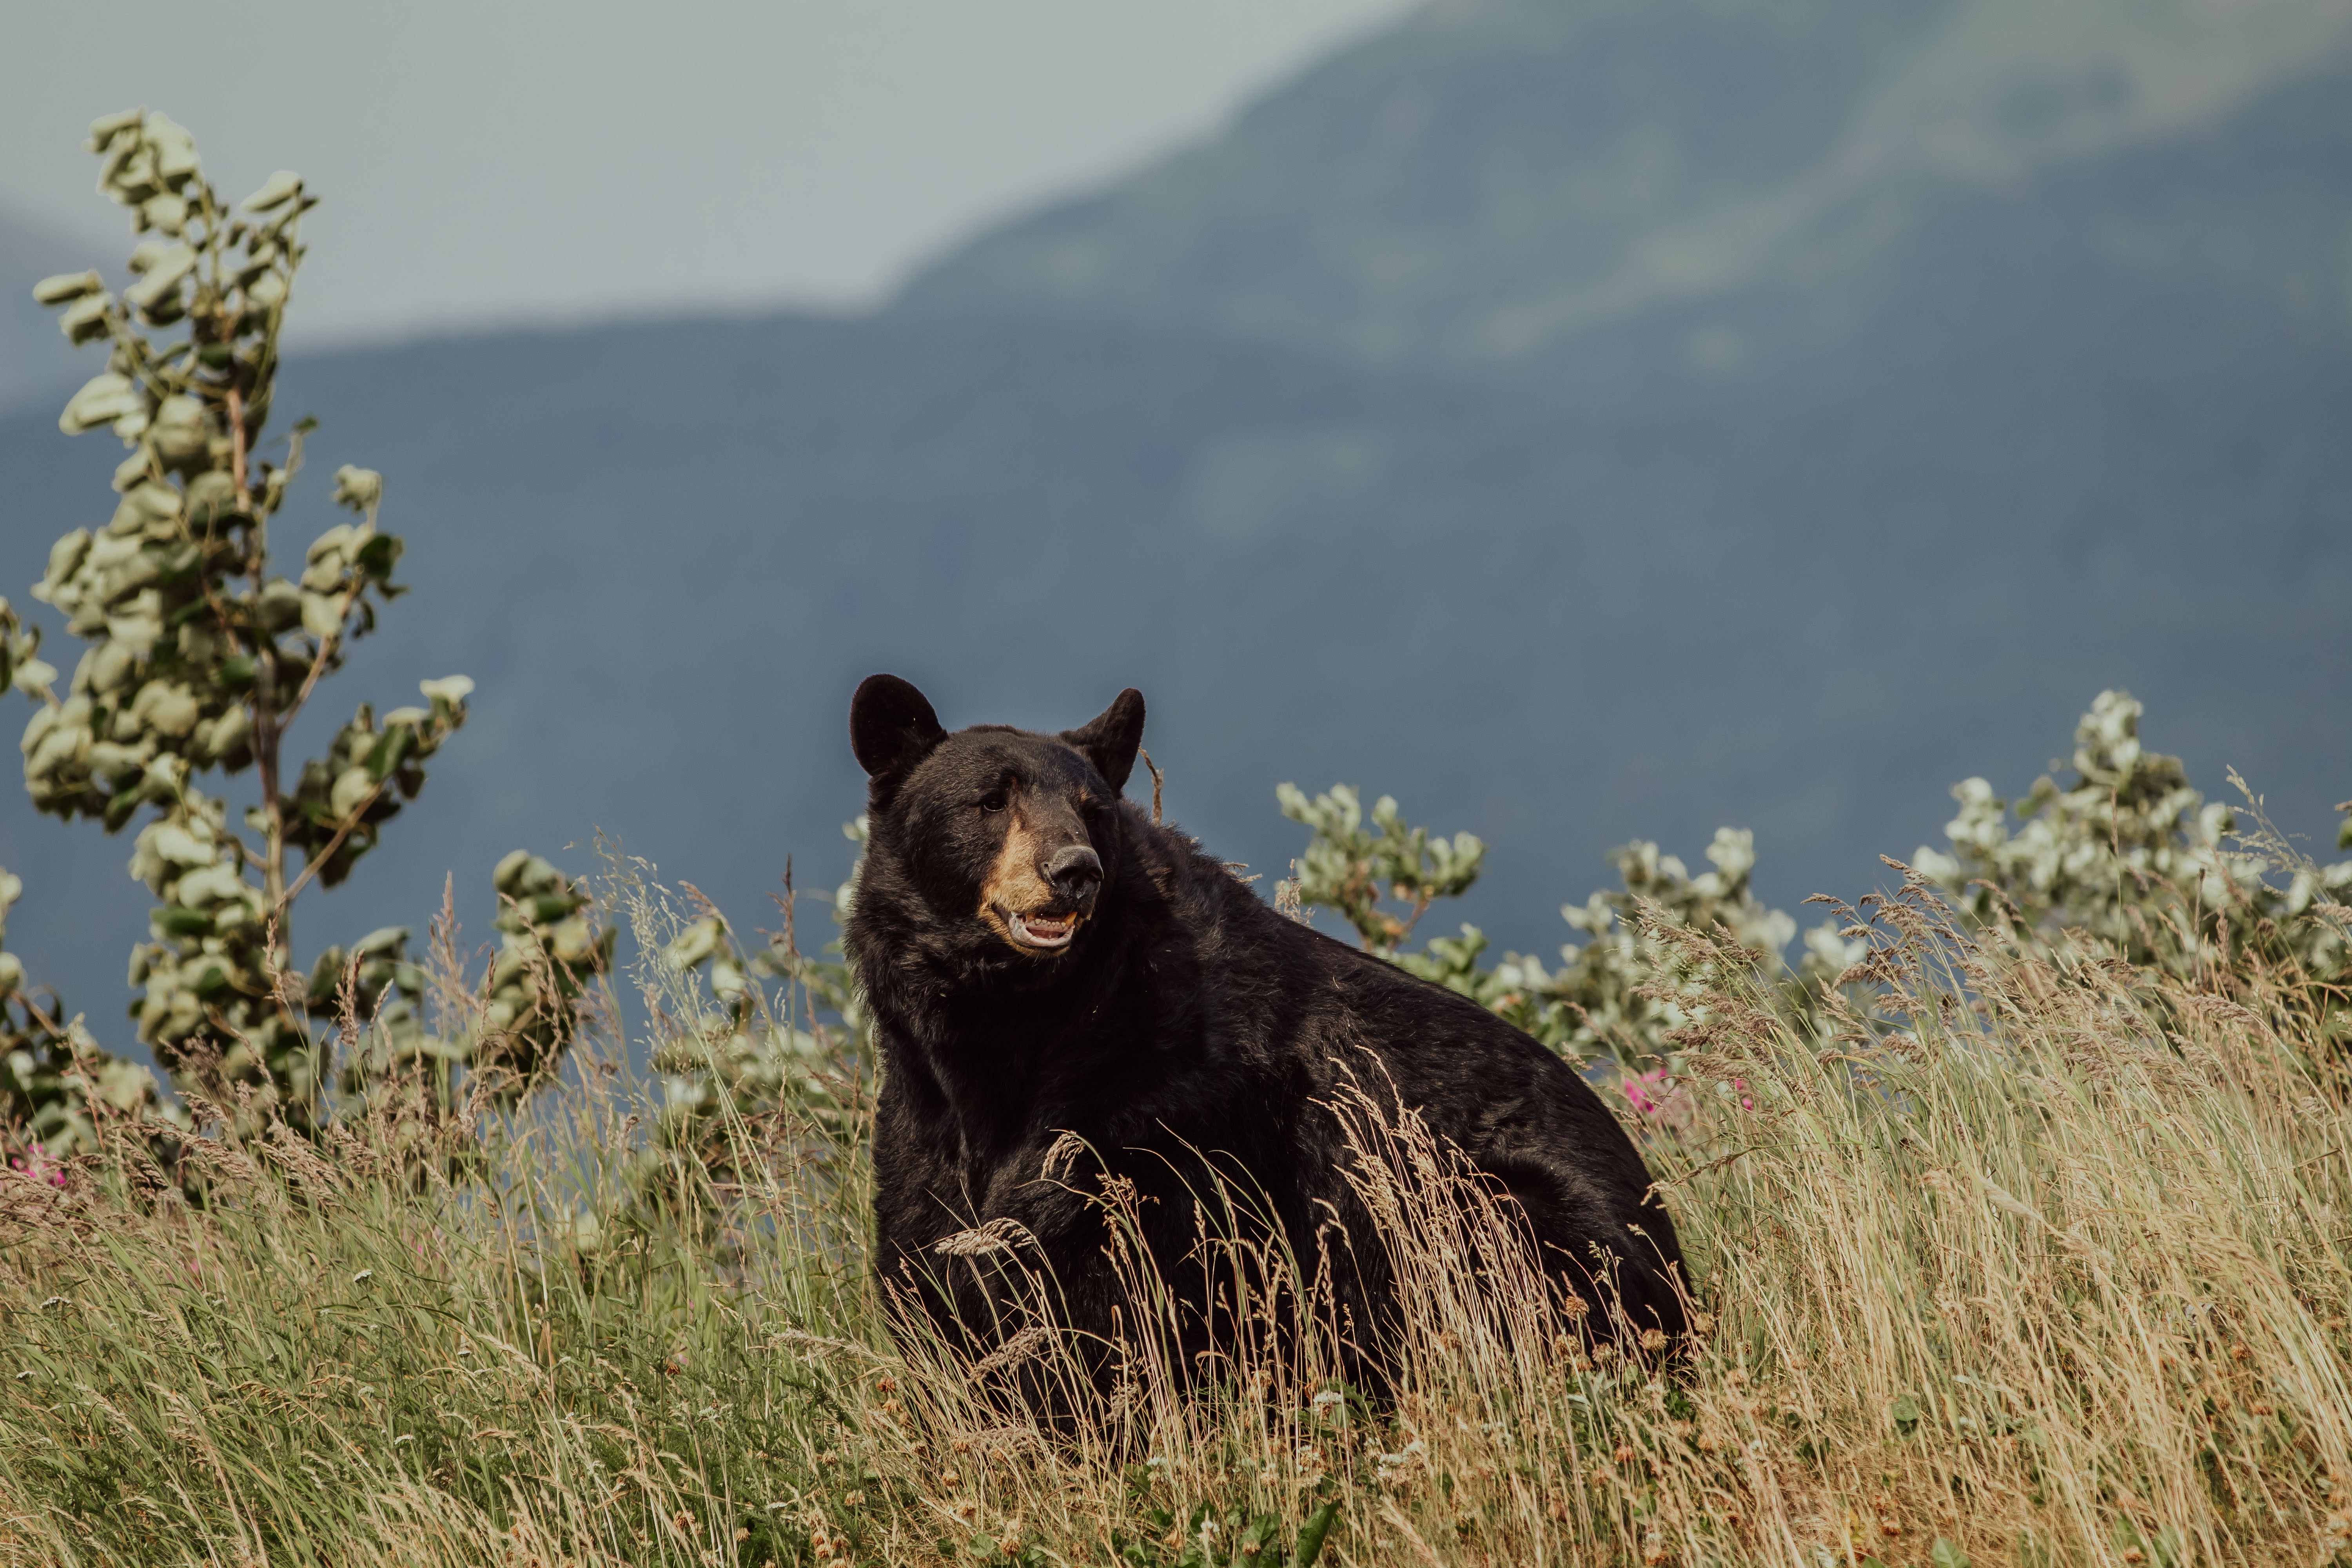 🐻 Five species that have recovered from near extinction